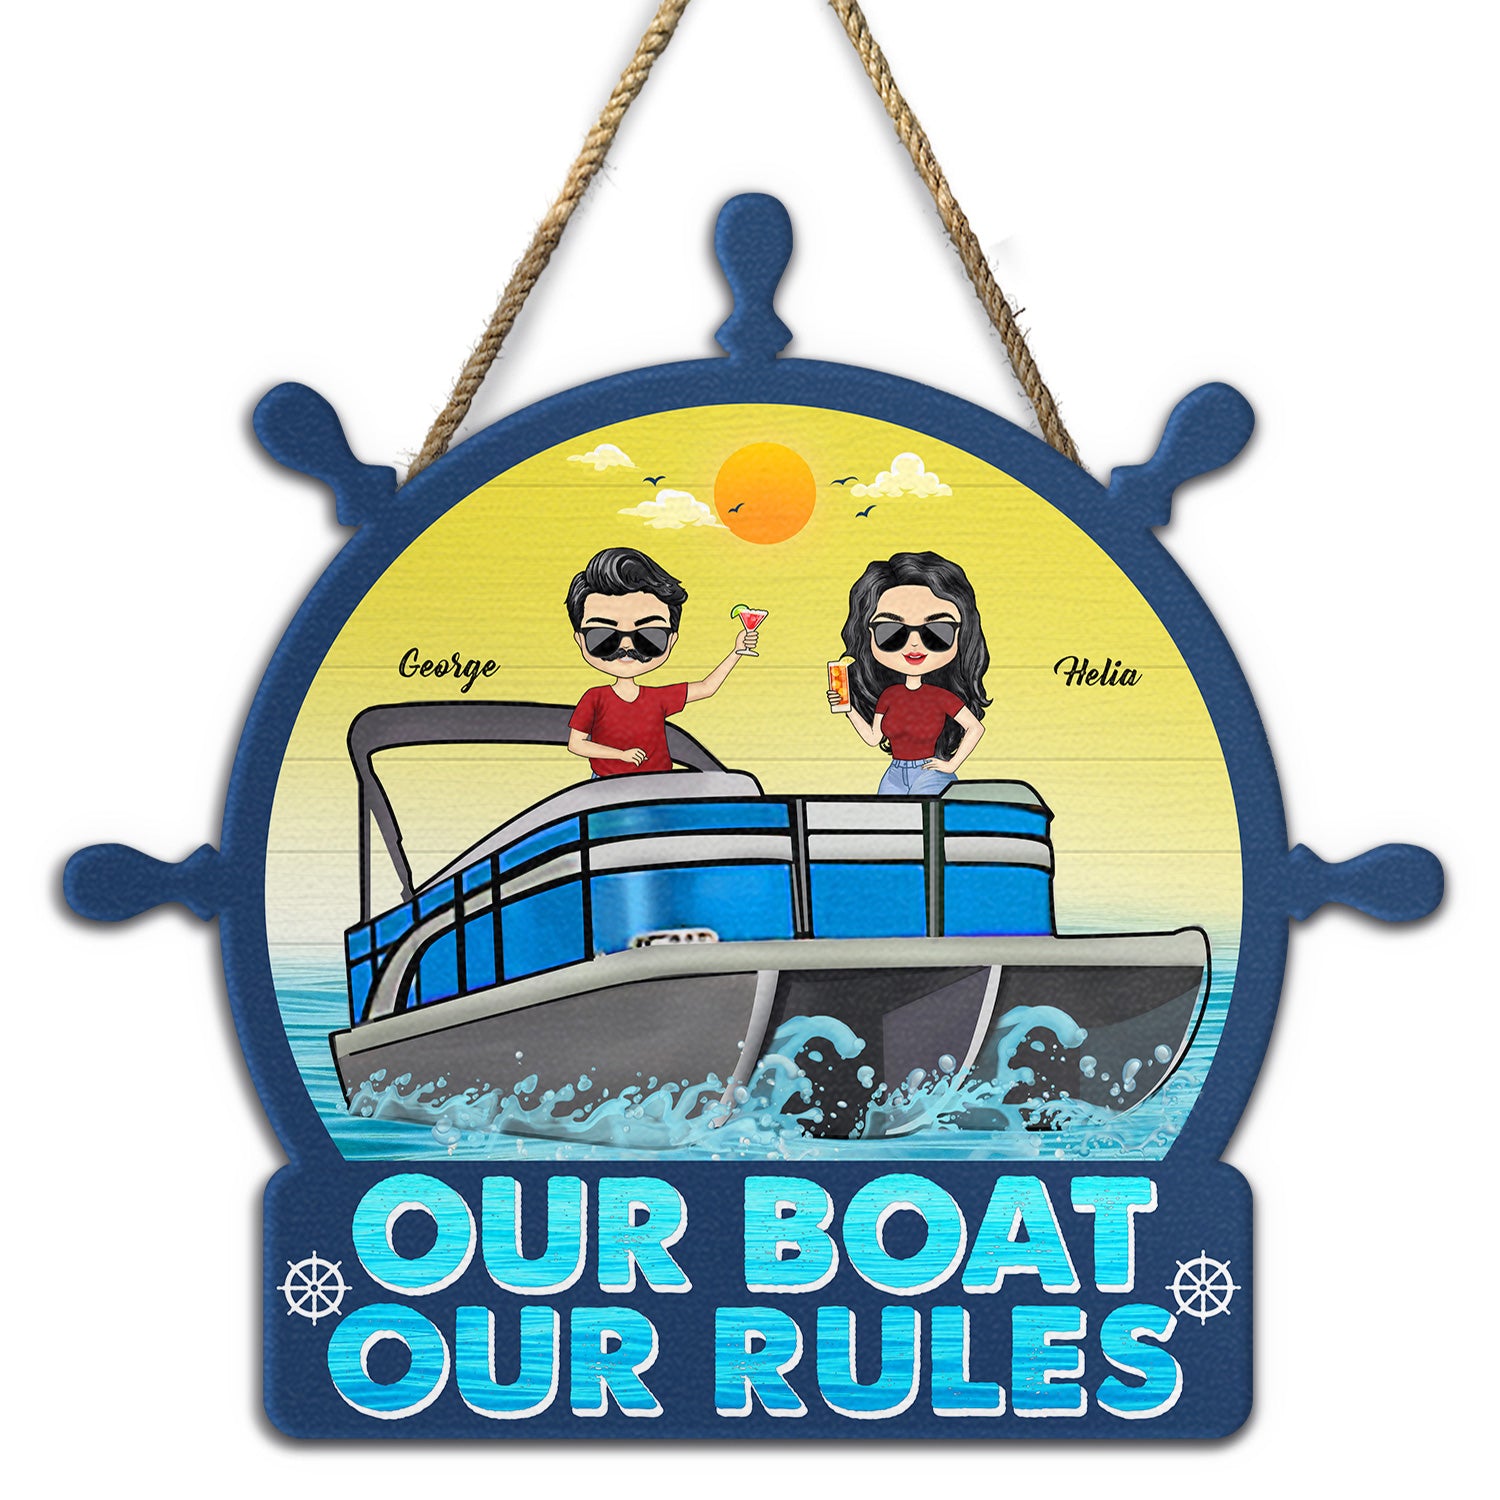 Our Boat Our Rules - Birthday, Decor Gift For Yourself, Couples, Pontoon Lovers - Personalized Custom Shaped Wood Sign